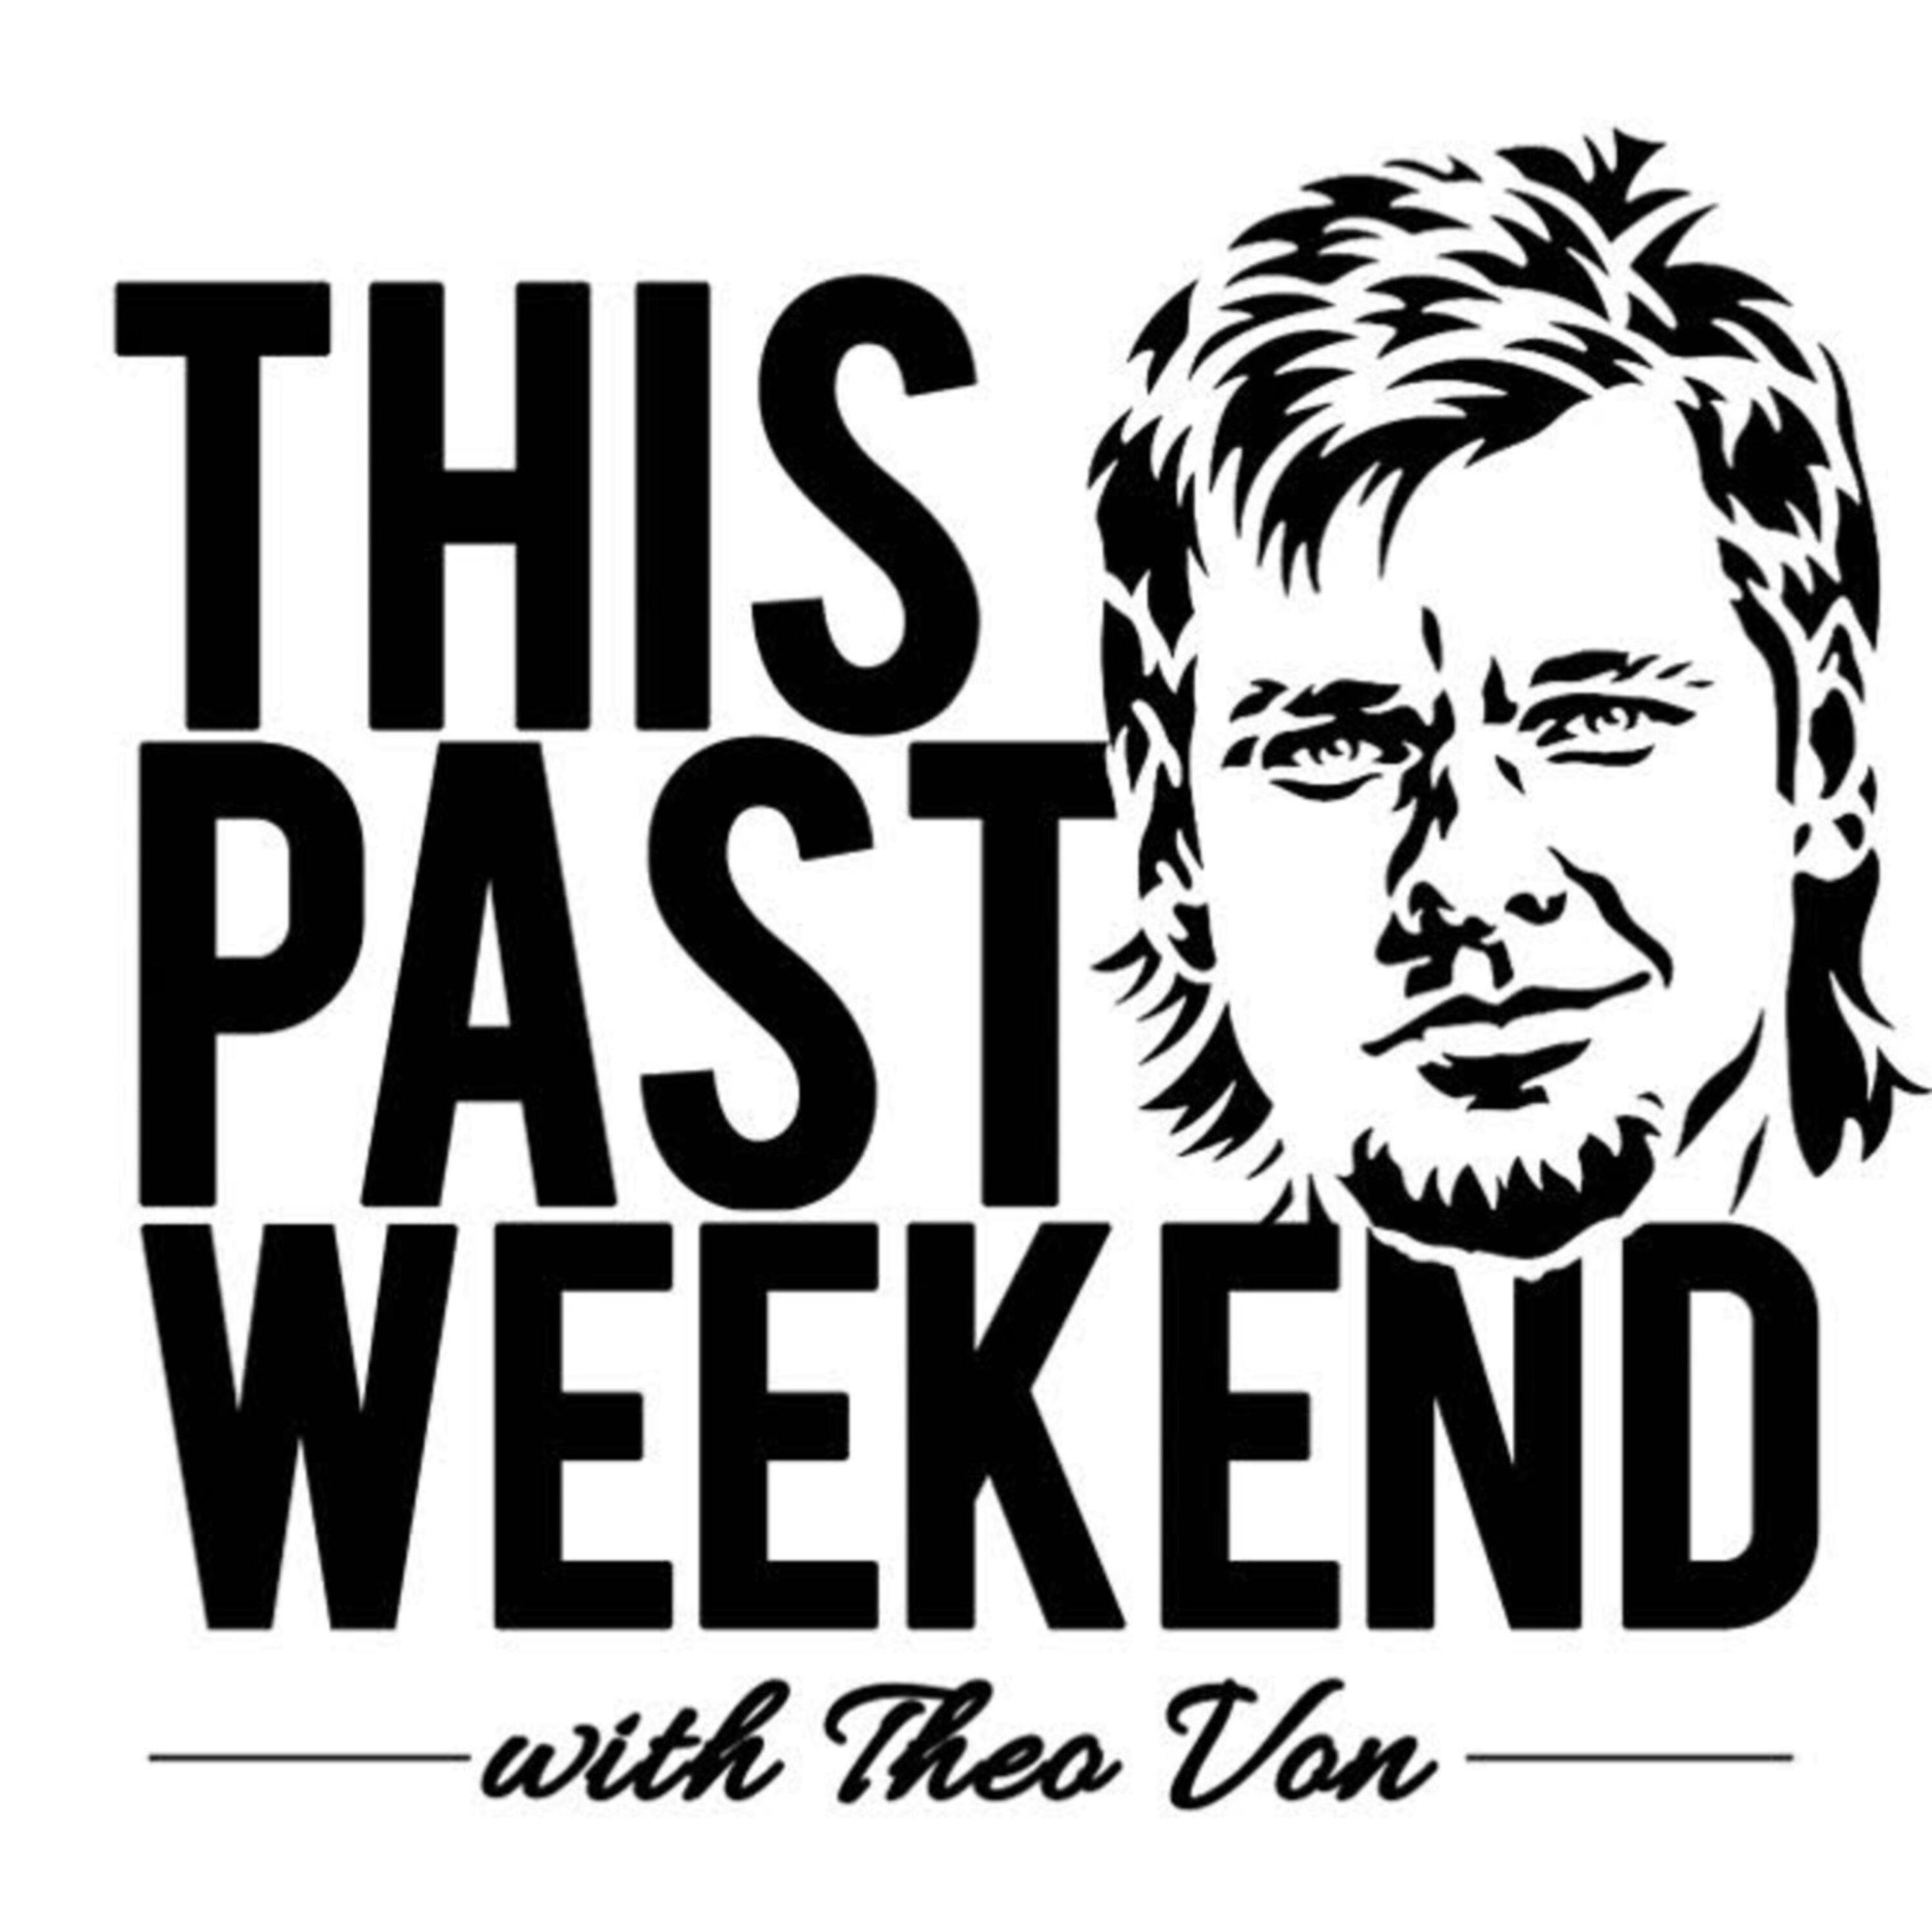 Christmas Spectacular with Will Sasso | This Past Weekend #158 by Theo Von